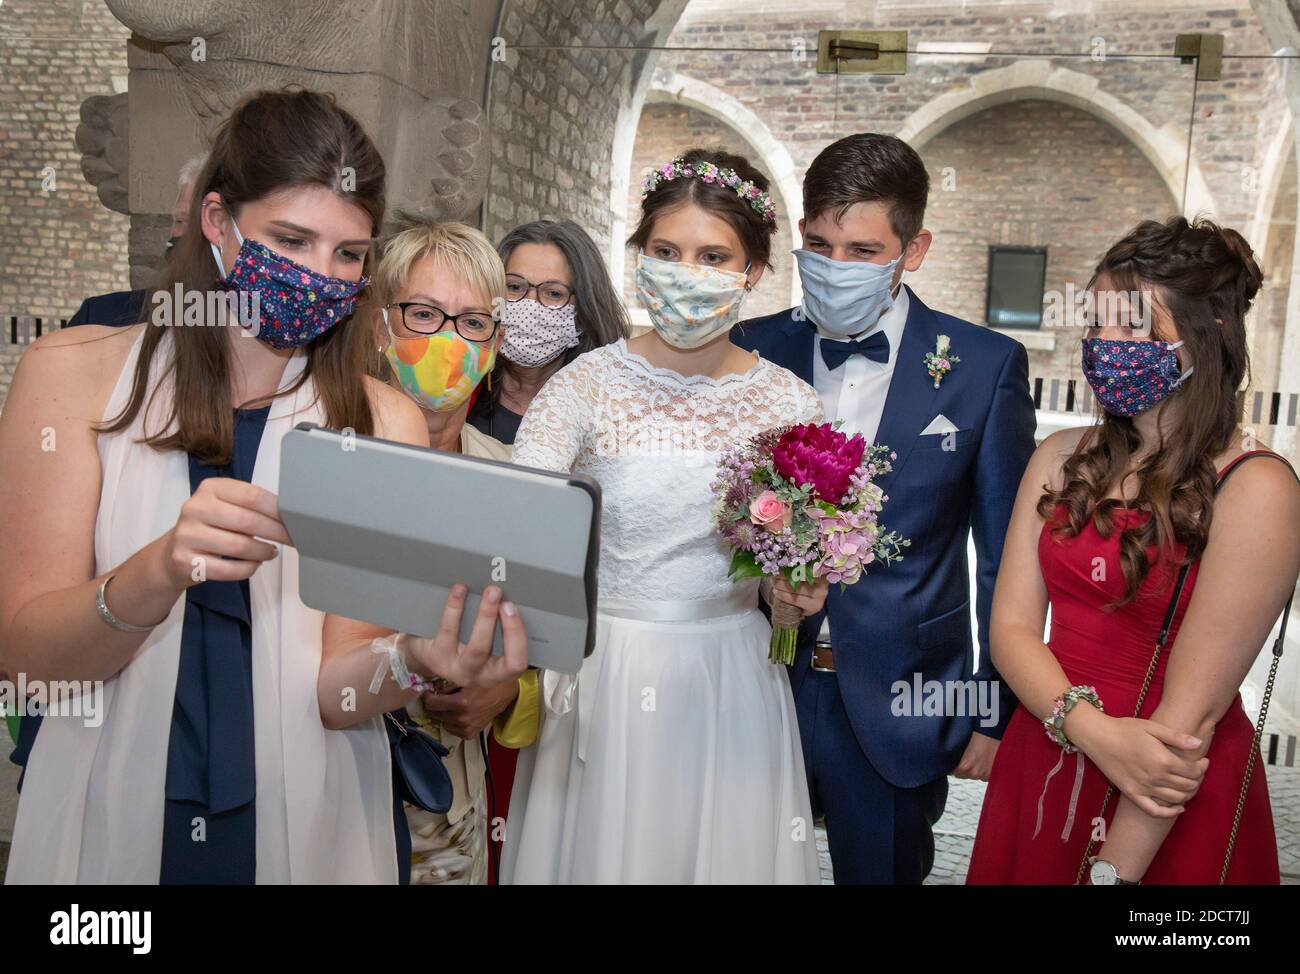 A wedding in Corona times. Susanne and André get married in the historic town hall of Cologne. Stock Photo